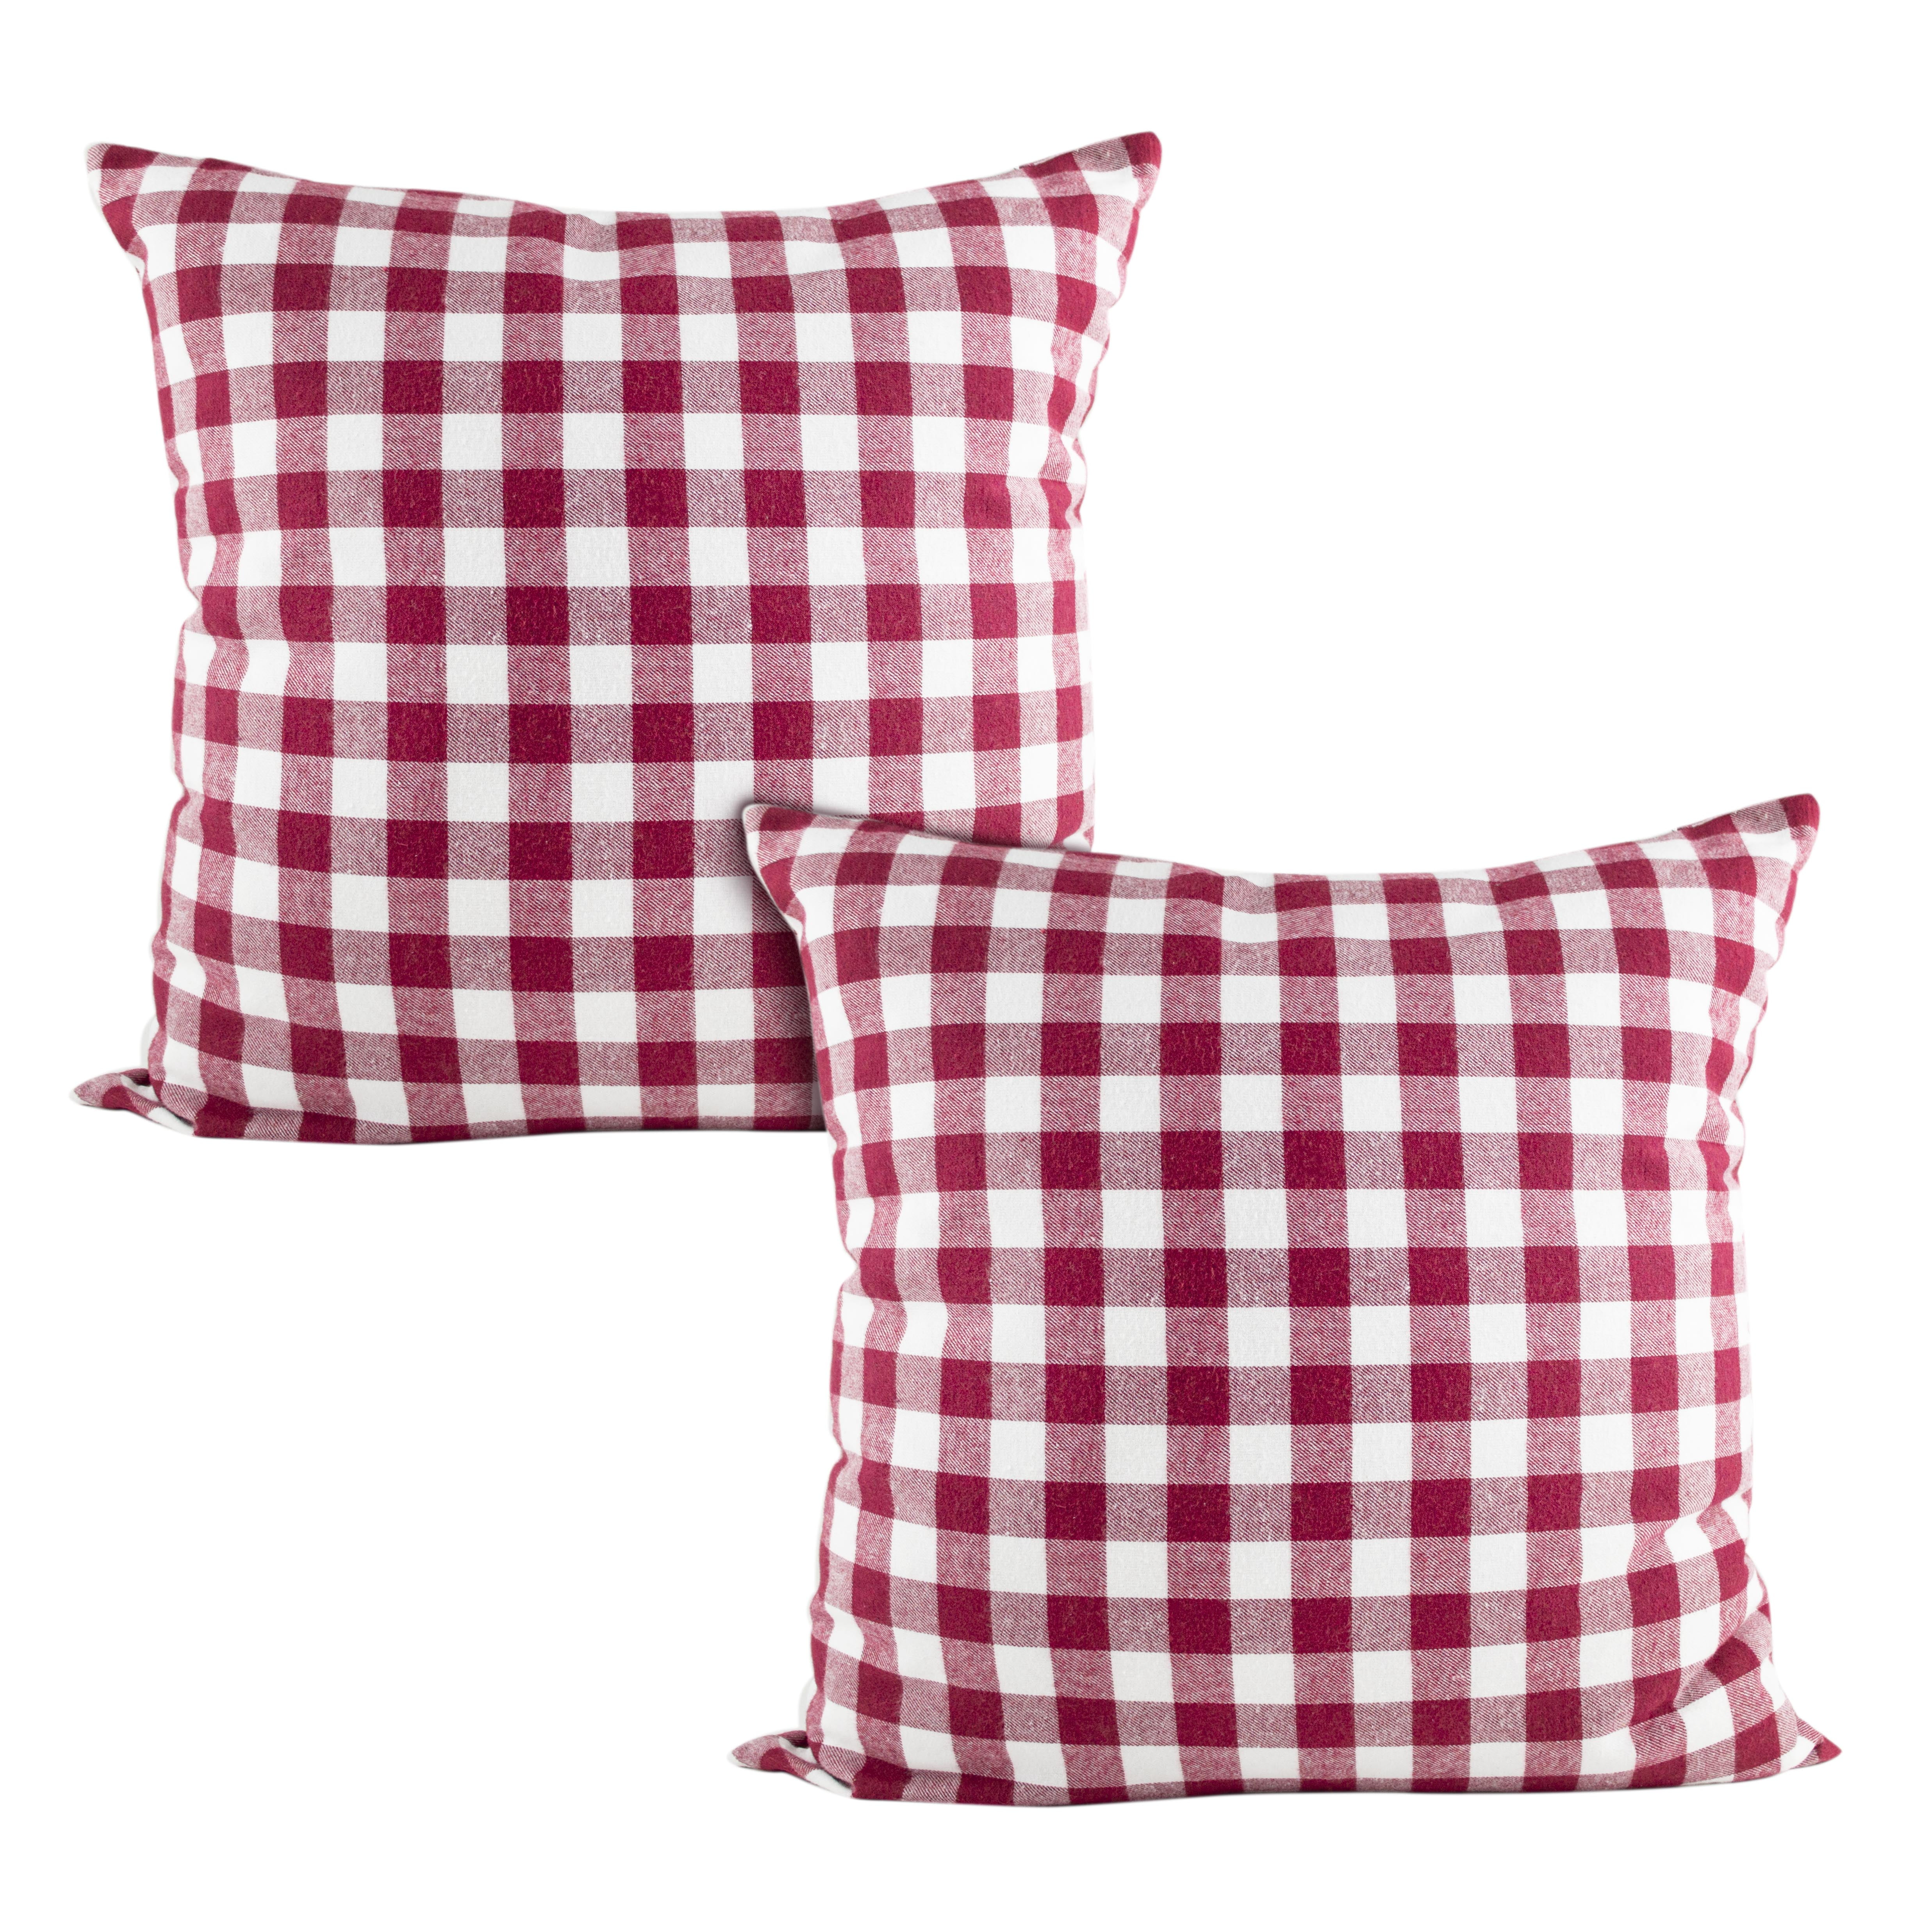 Black and Red Plaid /16" x 16" or 18"x18"/Cotton Accent Pillow Cover